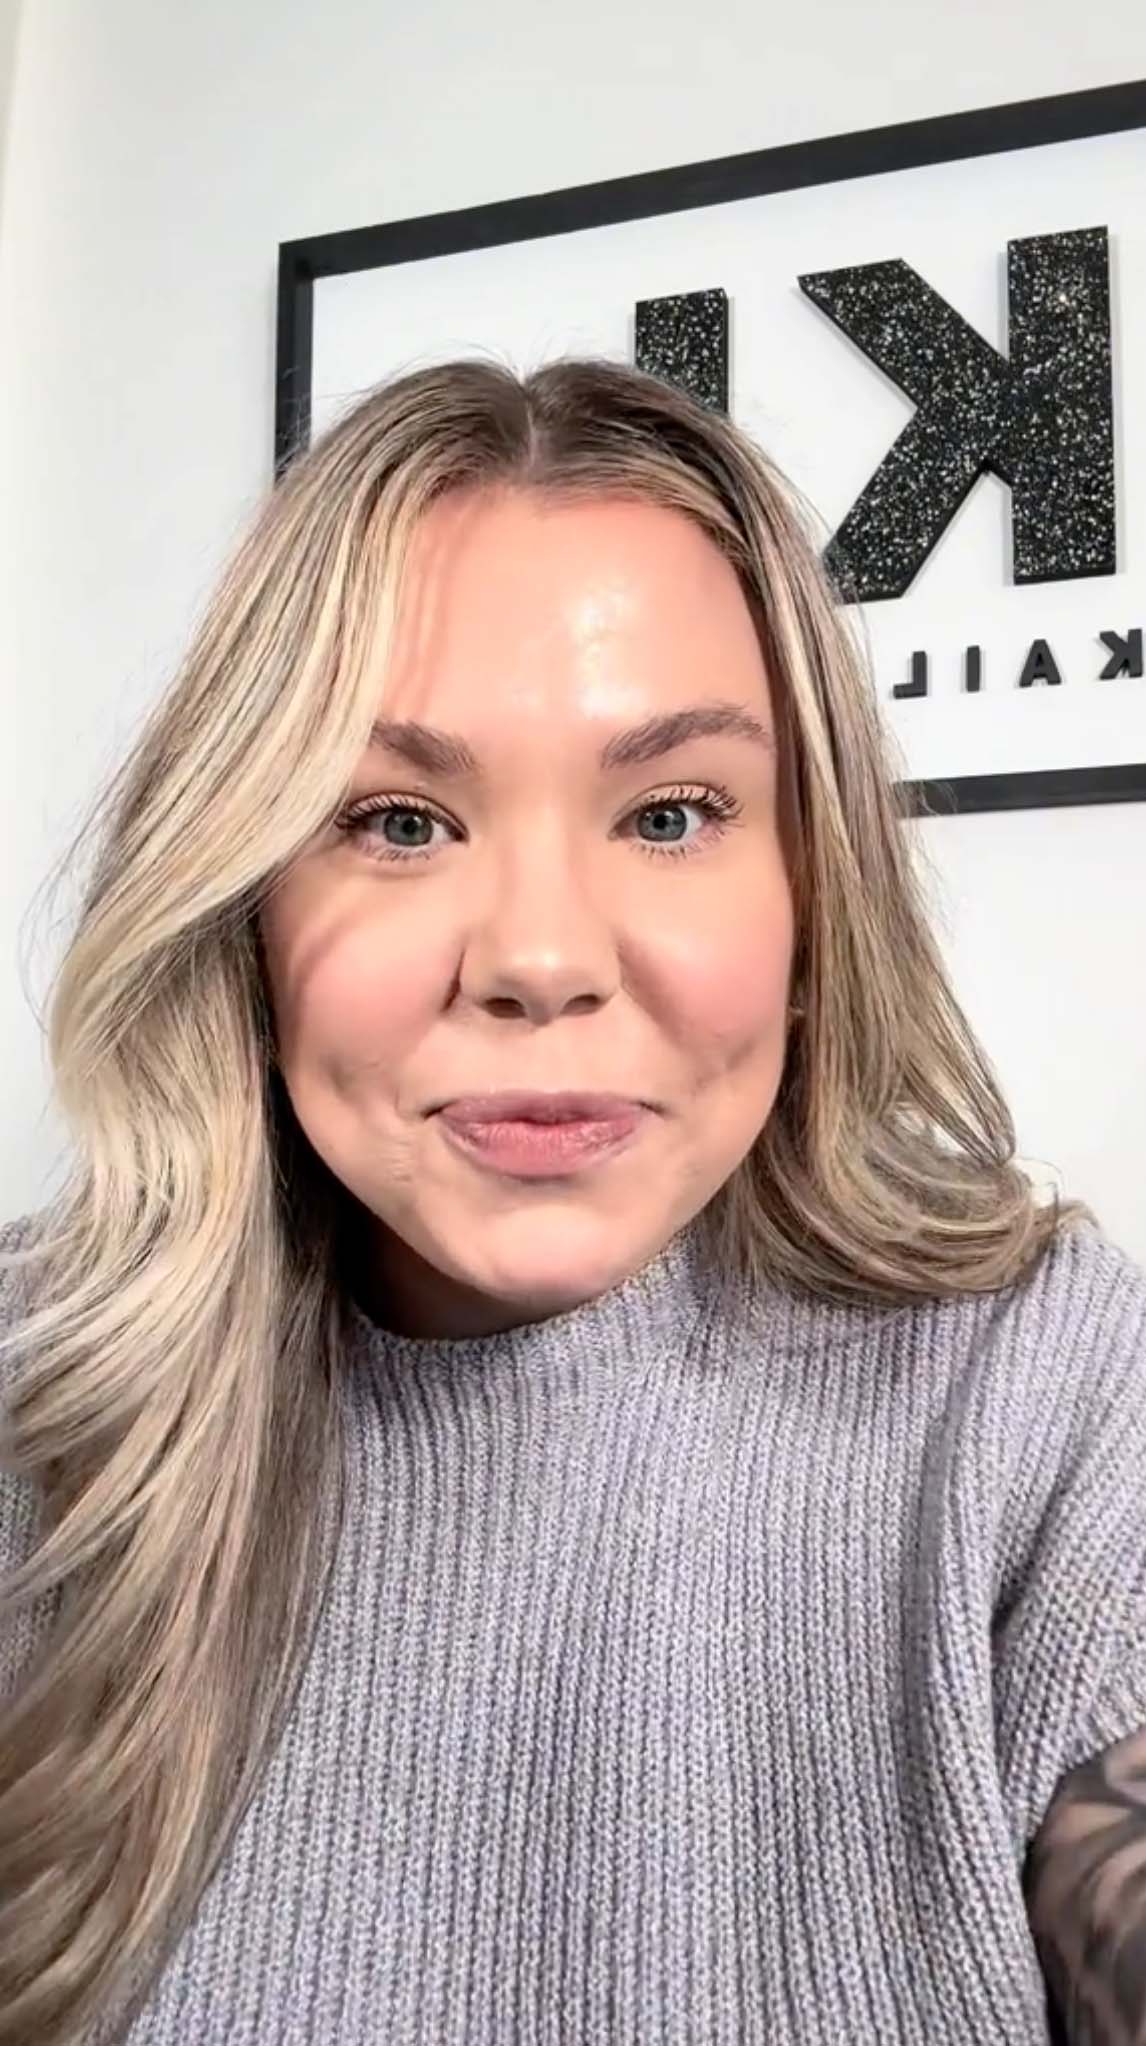 Kailyn clapped back at the troll and said that she has never heard that insult before